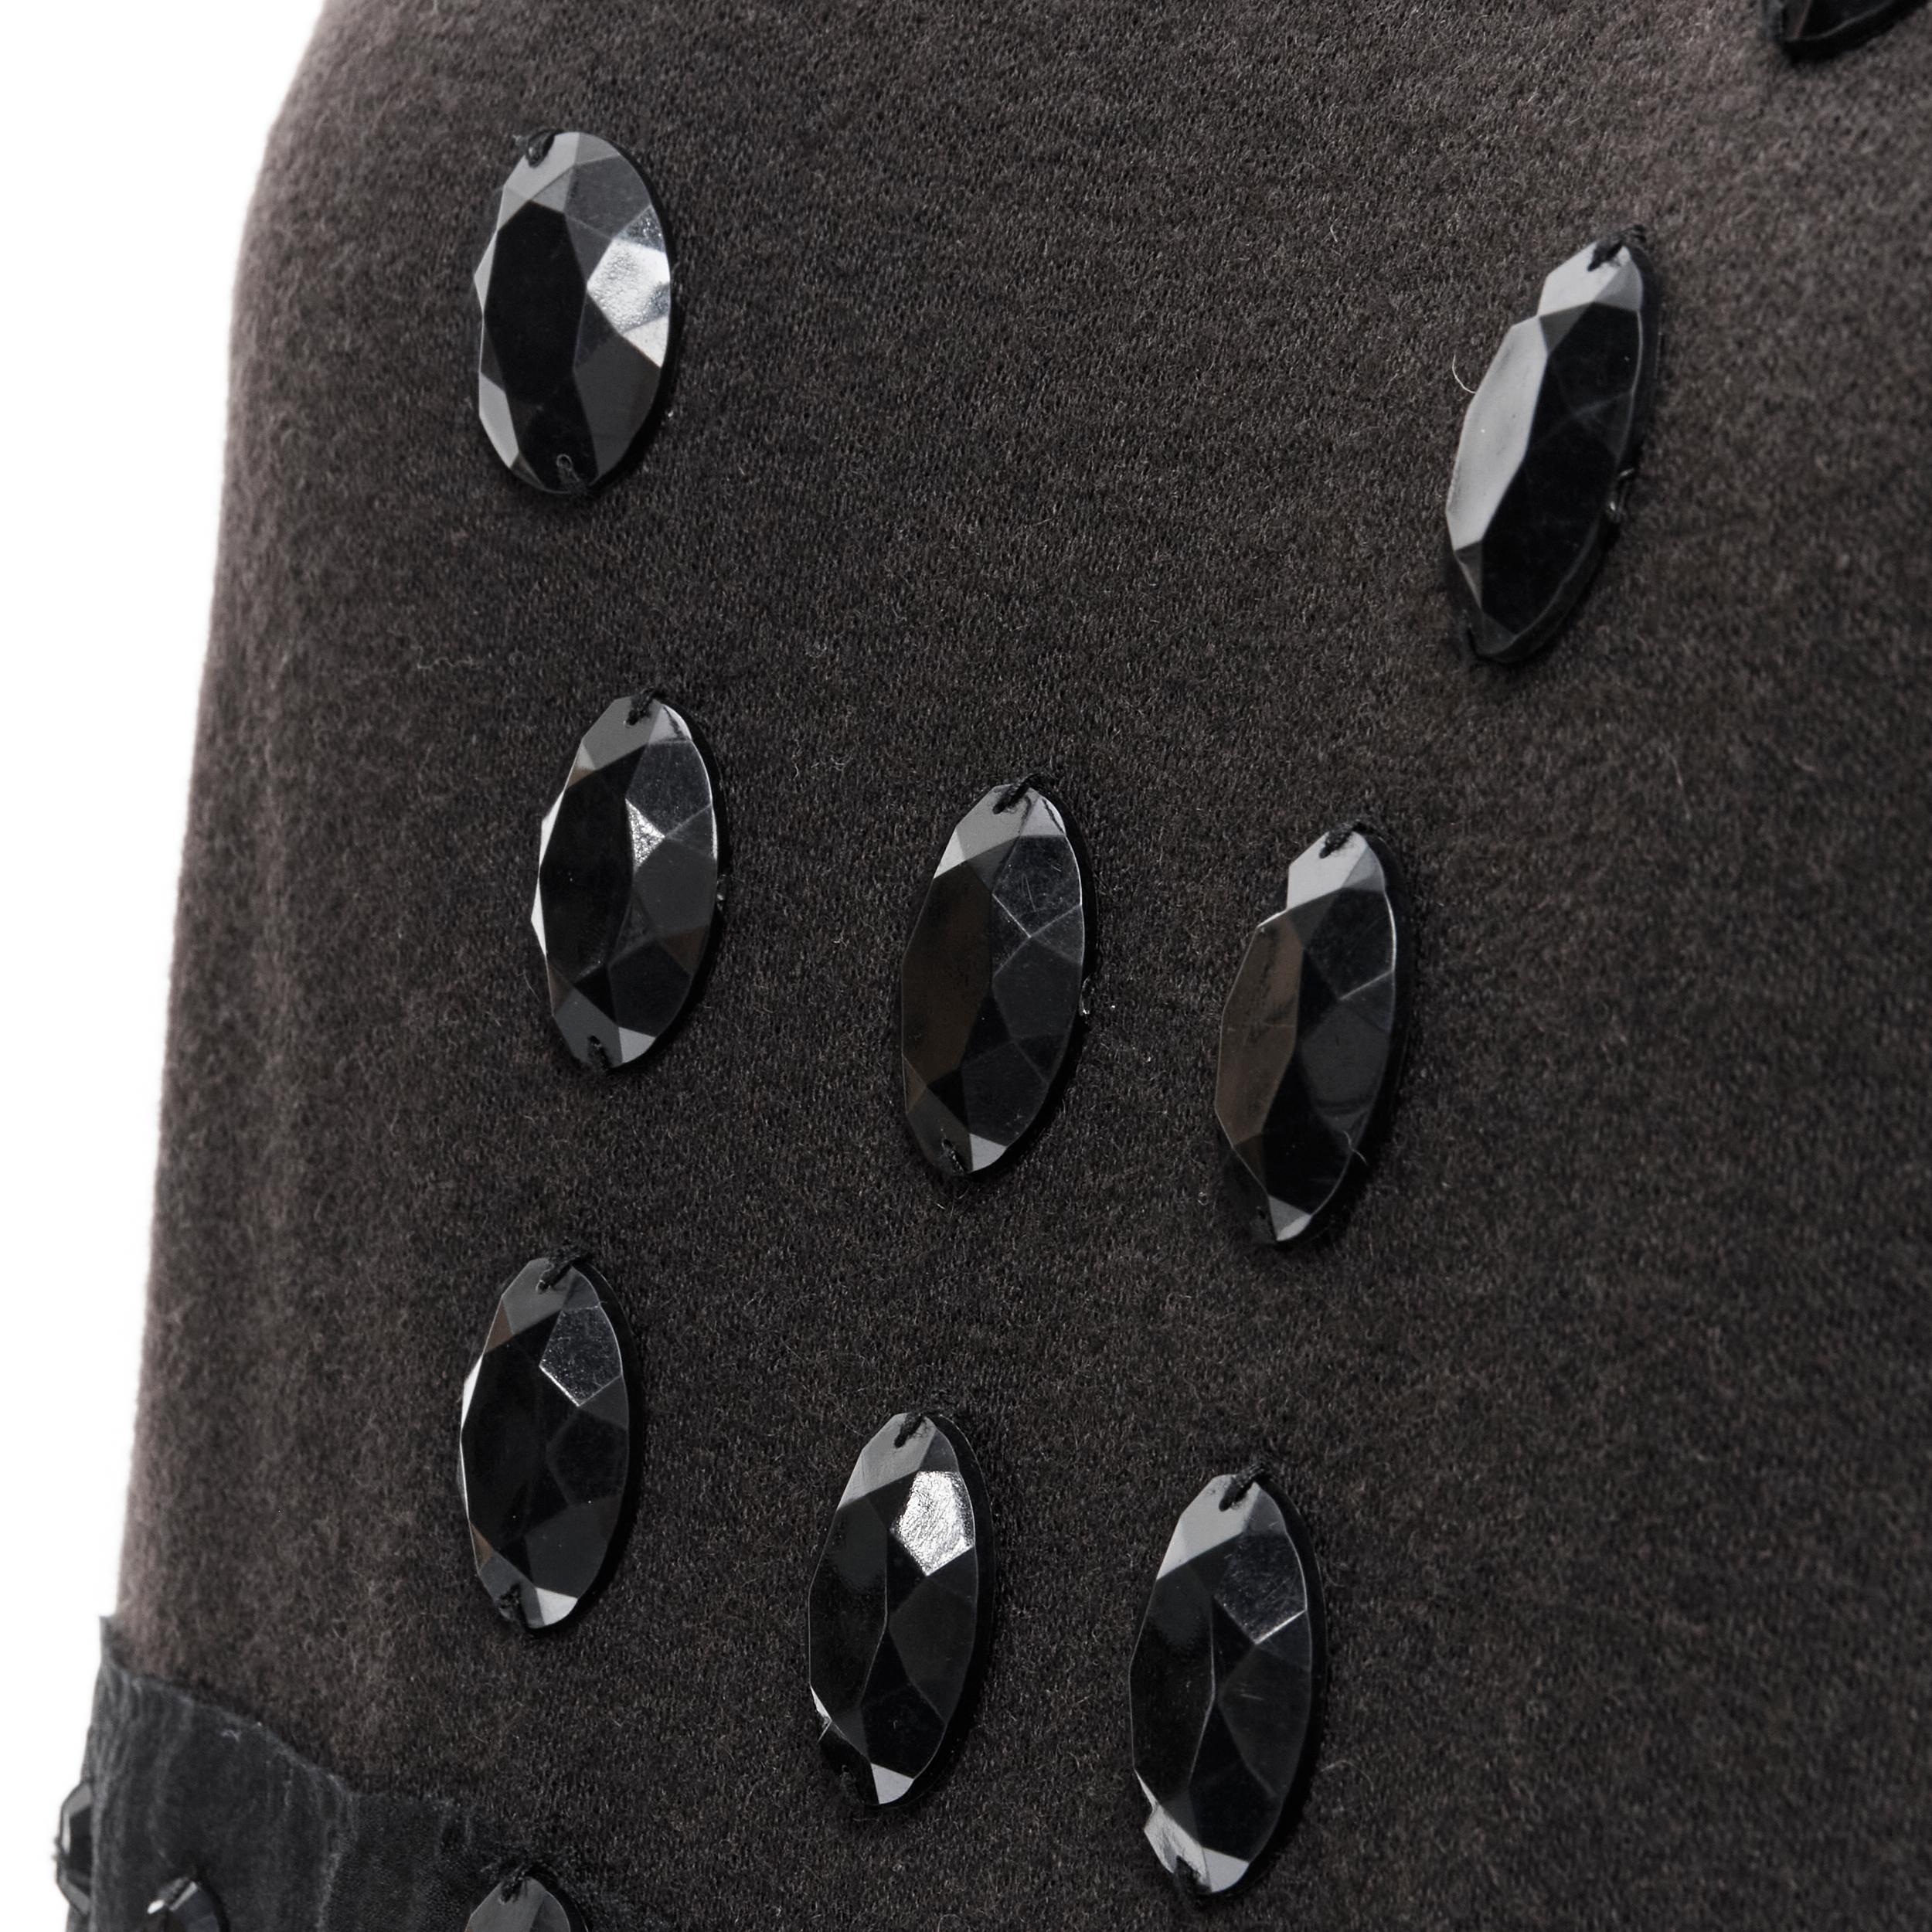 LANVIN 2004 Alber Elbaz brown wool black jewel embellished sheath dress FR38 S 
Reference: CELG/A00115 
Brand: Lanvin 
Designer: Alber Elbaz 
Collection: Fall Winter 2004 
Material: Wool 
Color: Brown 
Pattern: Solid 
Closure: Zip 
Extra Detail: